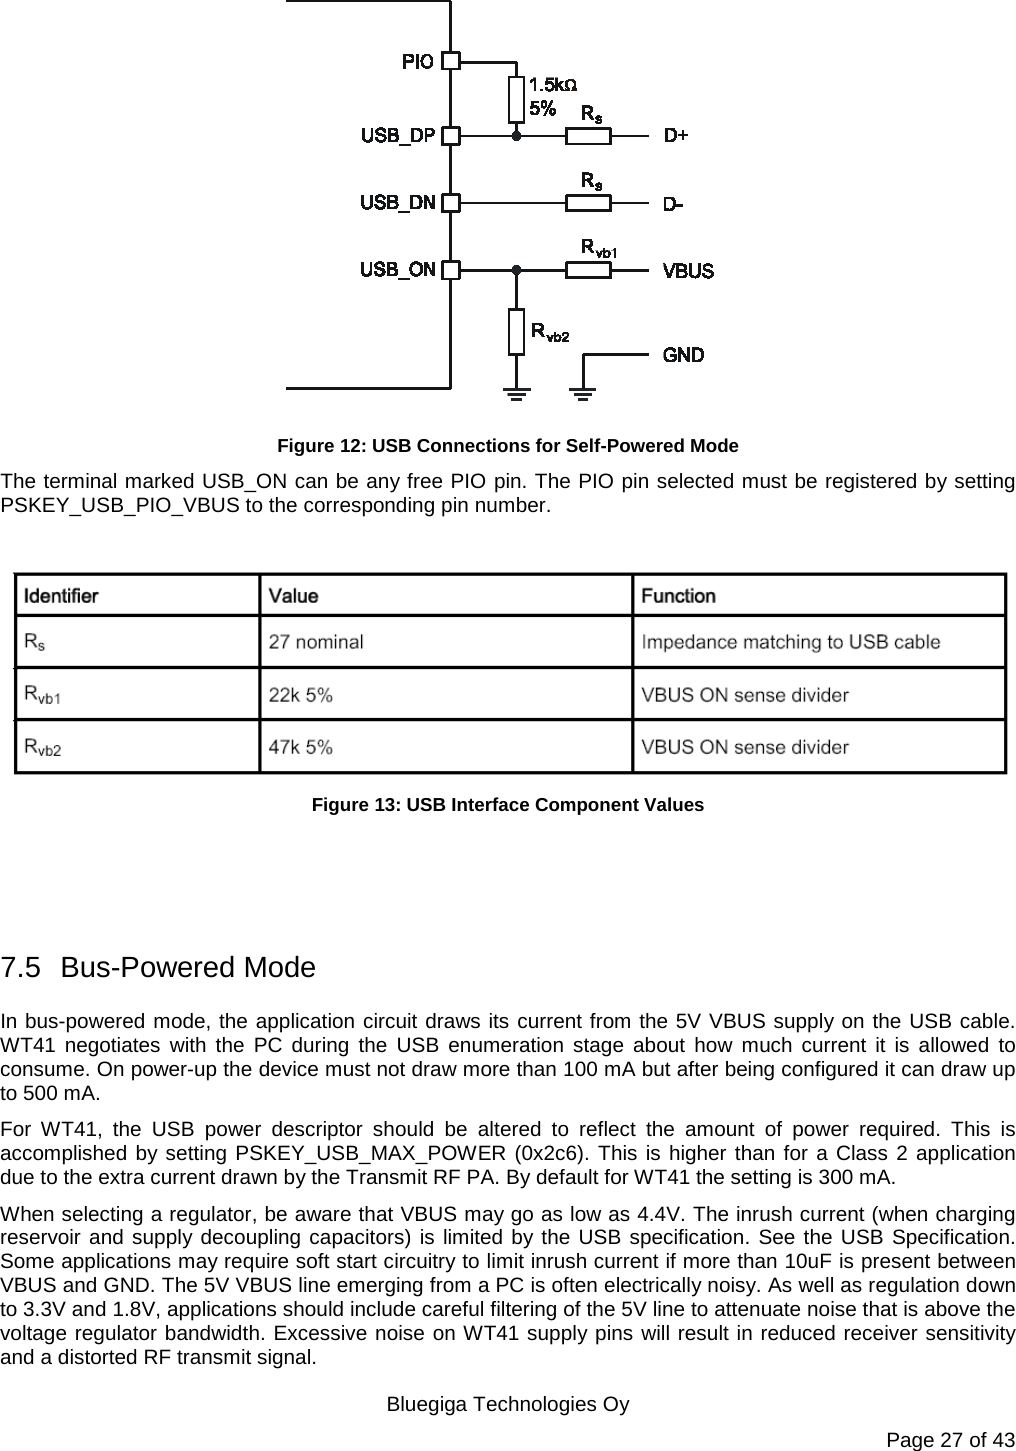   Bluegiga Technologies Oy Page 27 of 43  Figure 12: USB Connections for Self-Powered Mode The terminal marked USB_ON can be any free PIO pin. The PIO pin selected must be registered by setting PSKEY_USB_PIO_VBUS to the corresponding pin number.   Figure 13: USB Interface Component Values    7.5 Bus-Powered Mode In bus-powered mode, the application circuit draws its current from the 5V VBUS supply on the USB cable. WT41 negotiates with the PC during the USB enumeration stage about how much current it is allowed to consume. On power-up the device must not draw more than 100 mA but after being configured it can draw up to 500 mA. For  WT41, the USB power descriptor should be altered to reflect the amount of power required. This is accomplished by setting PSKEY_USB_MAX_POWER (0x2c6). This is higher than for a Class 2 application due to the extra current drawn by the Transmit RF PA. By default for WT41 the setting is 300 mA. When selecting a regulator, be aware that VBUS may go as low as 4.4V. The inrush current (when charging reservoir and supply decoupling capacitors) is limited by the USB specification. See the USB Specification. Some applications may require soft start circuitry to limit inrush current if more than 10uF is present between VBUS and GND. The 5V VBUS line emerging from a PC is often electrically noisy. As well as regulation down to 3.3V and 1.8V, applications should include careful filtering of the 5V line to attenuate noise that is above the voltage regulator bandwidth. Excessive noise on WT41 supply pins will result in reduced receiver sensitivity and a distorted RF transmit signal. 